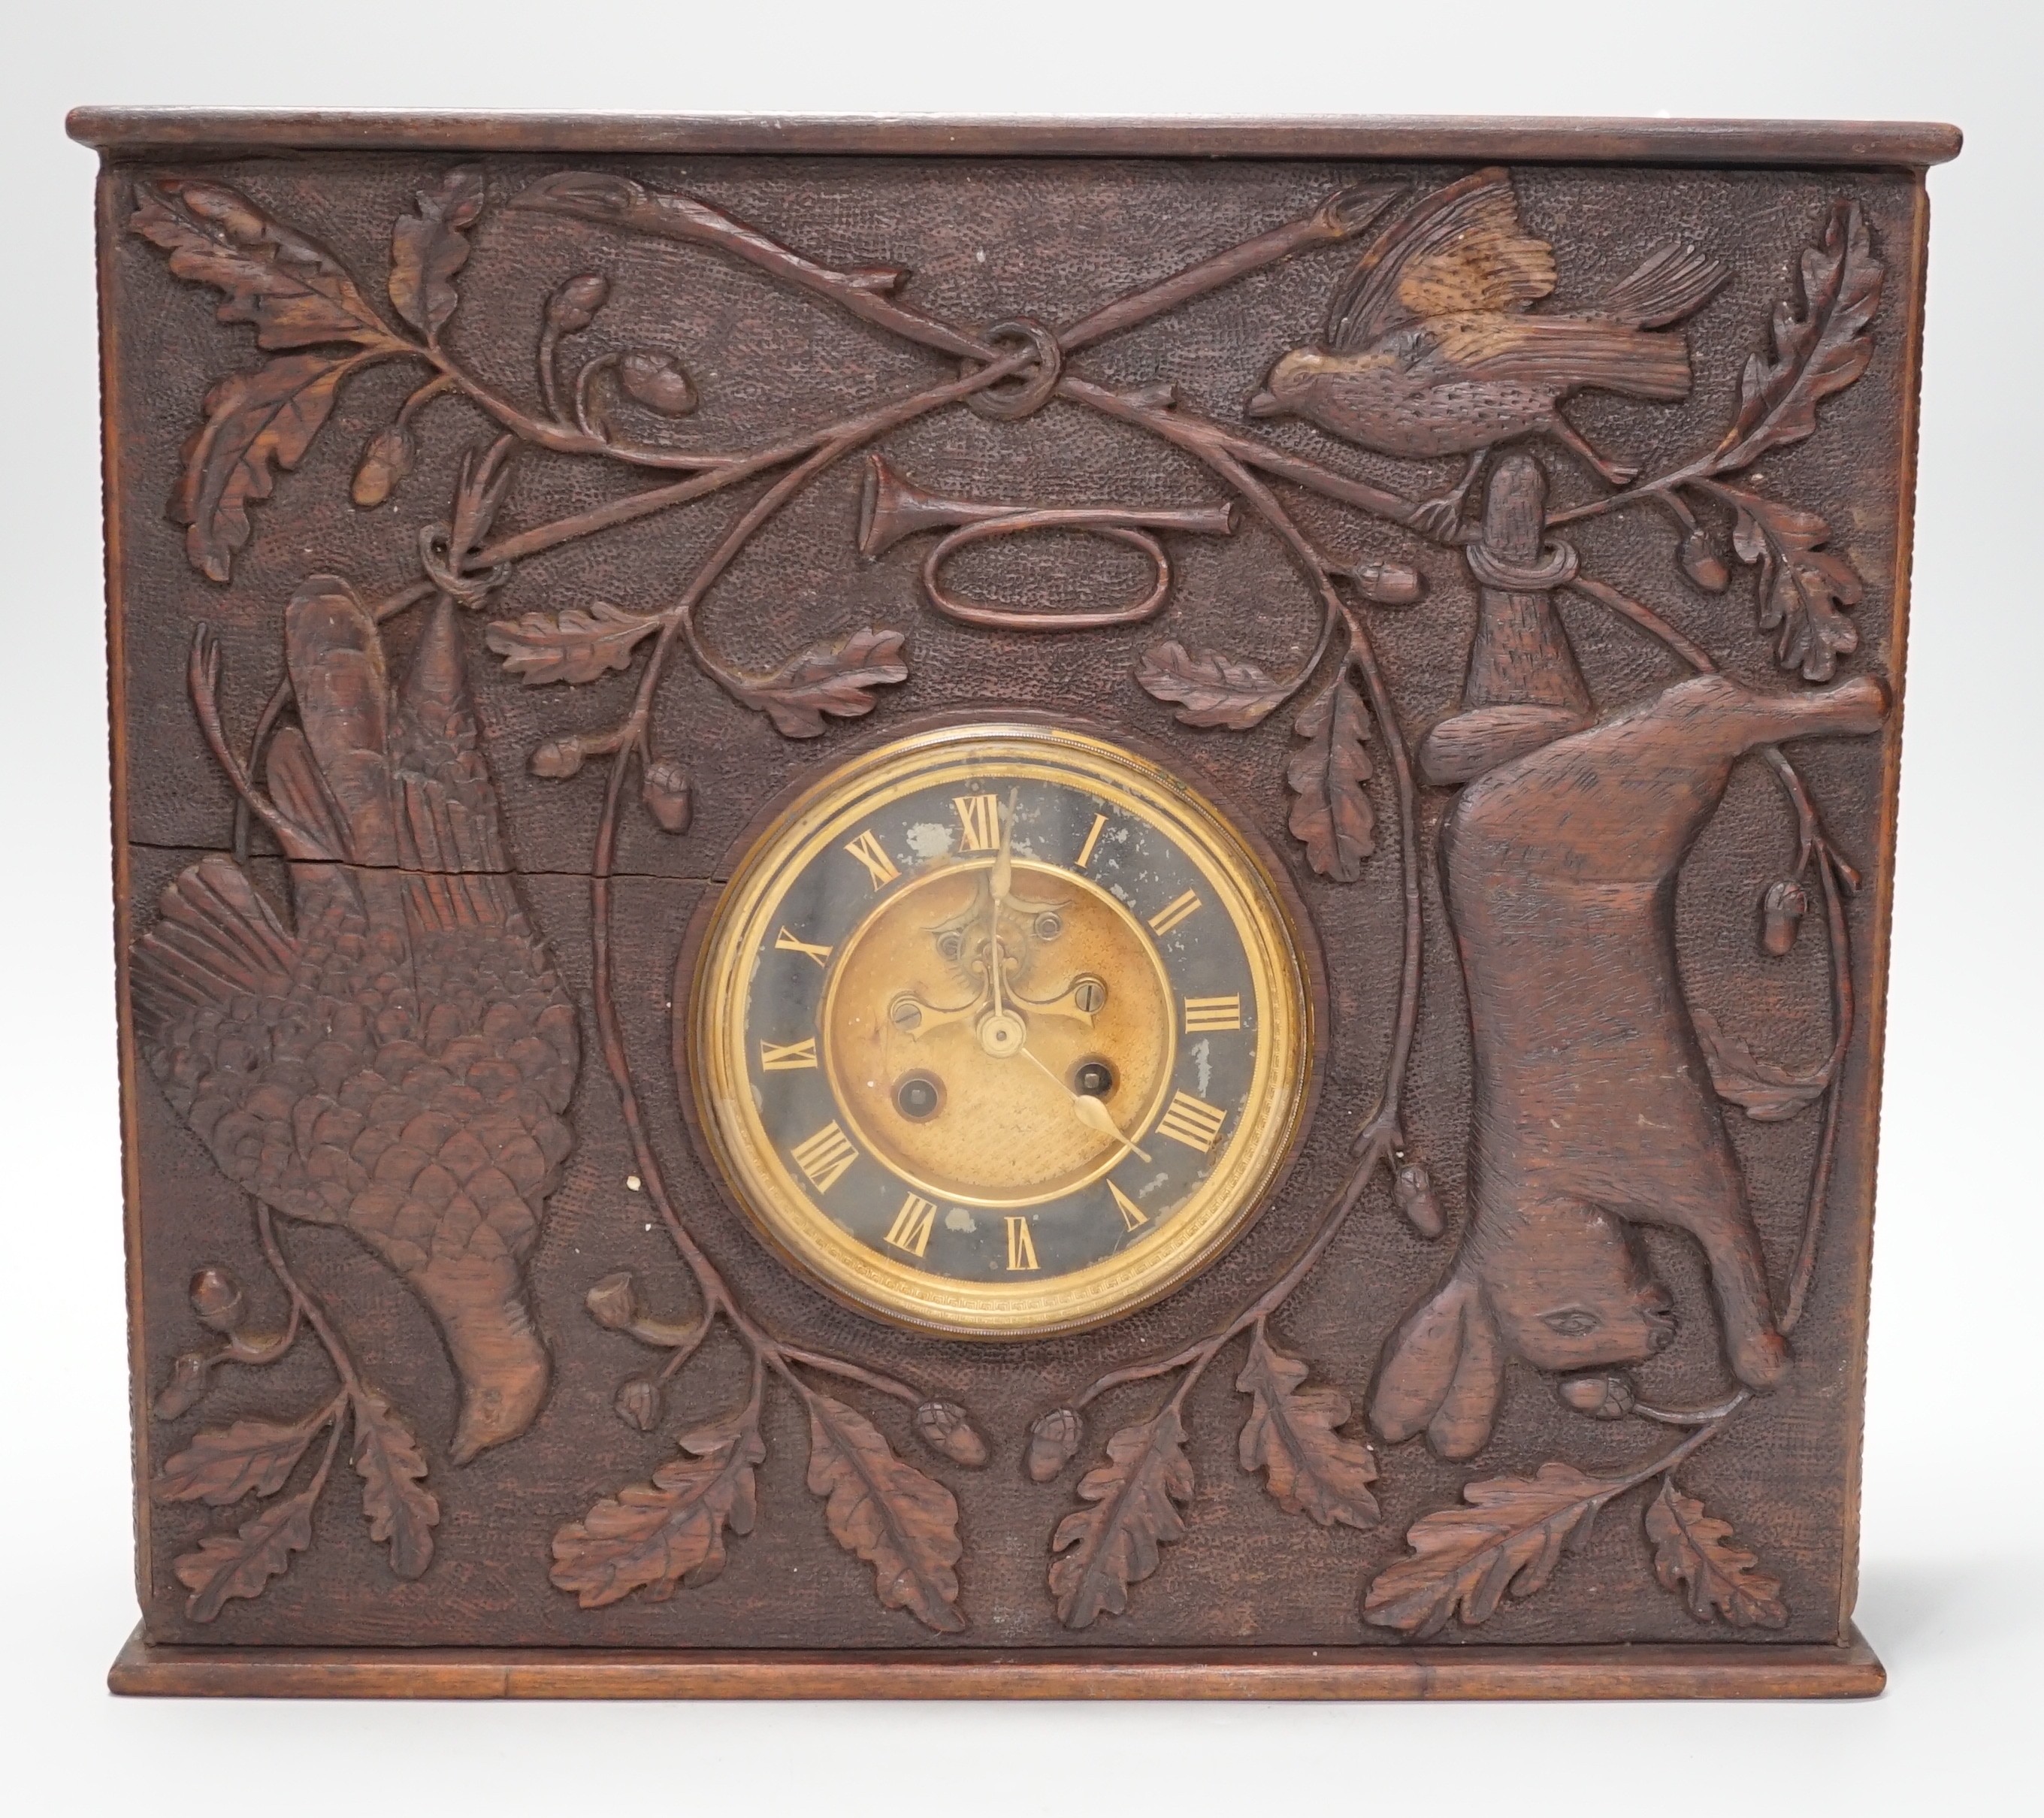 A late 19th century / early 20th century folk art carved oak cased clock, decorated with hanging dead game amongst oak sprigs and acorns, 34x39cm